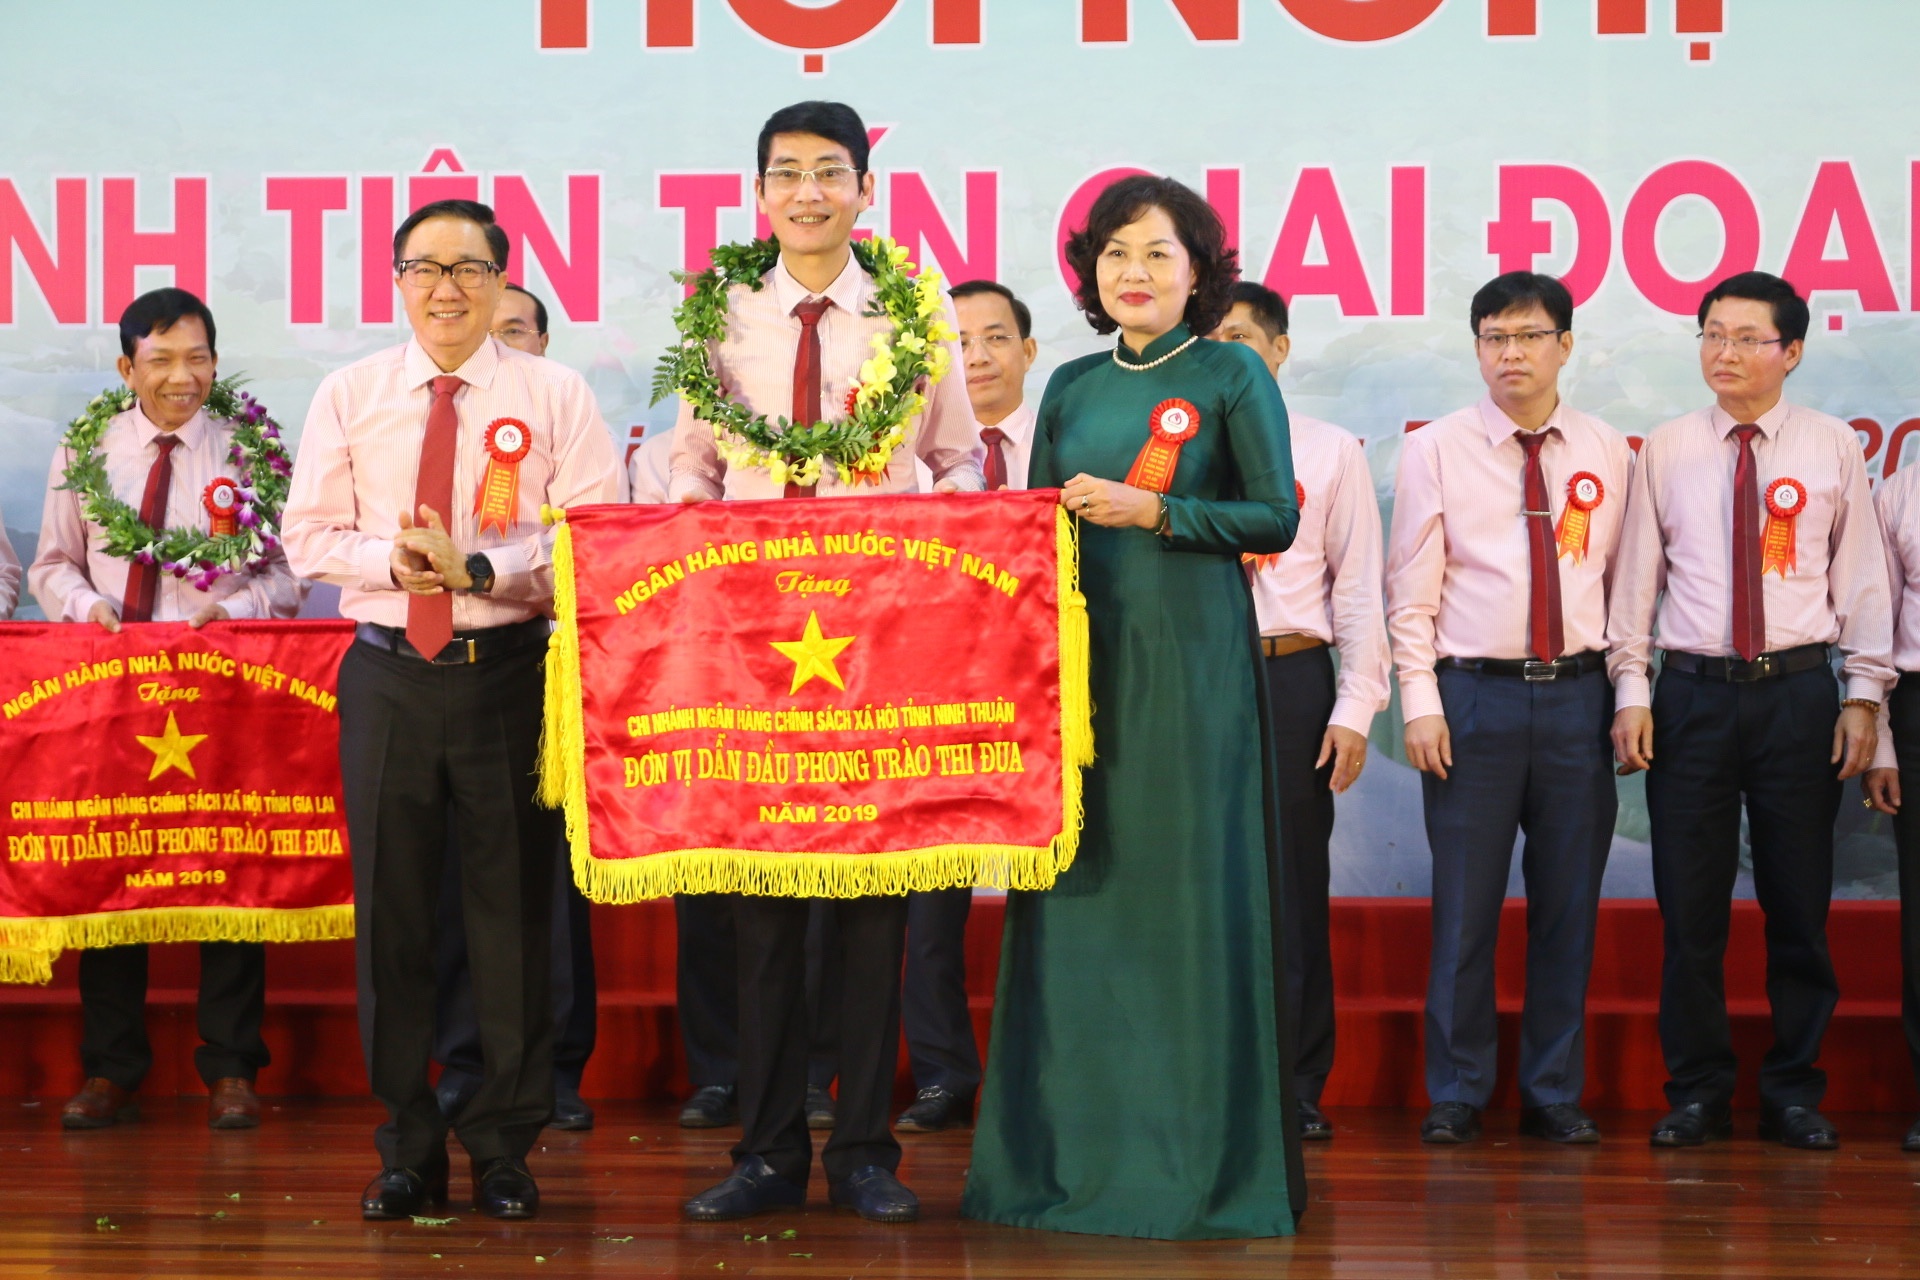  Authority to decide on the award of emulation titles and forms of commendation in the banking sector in Vietnam